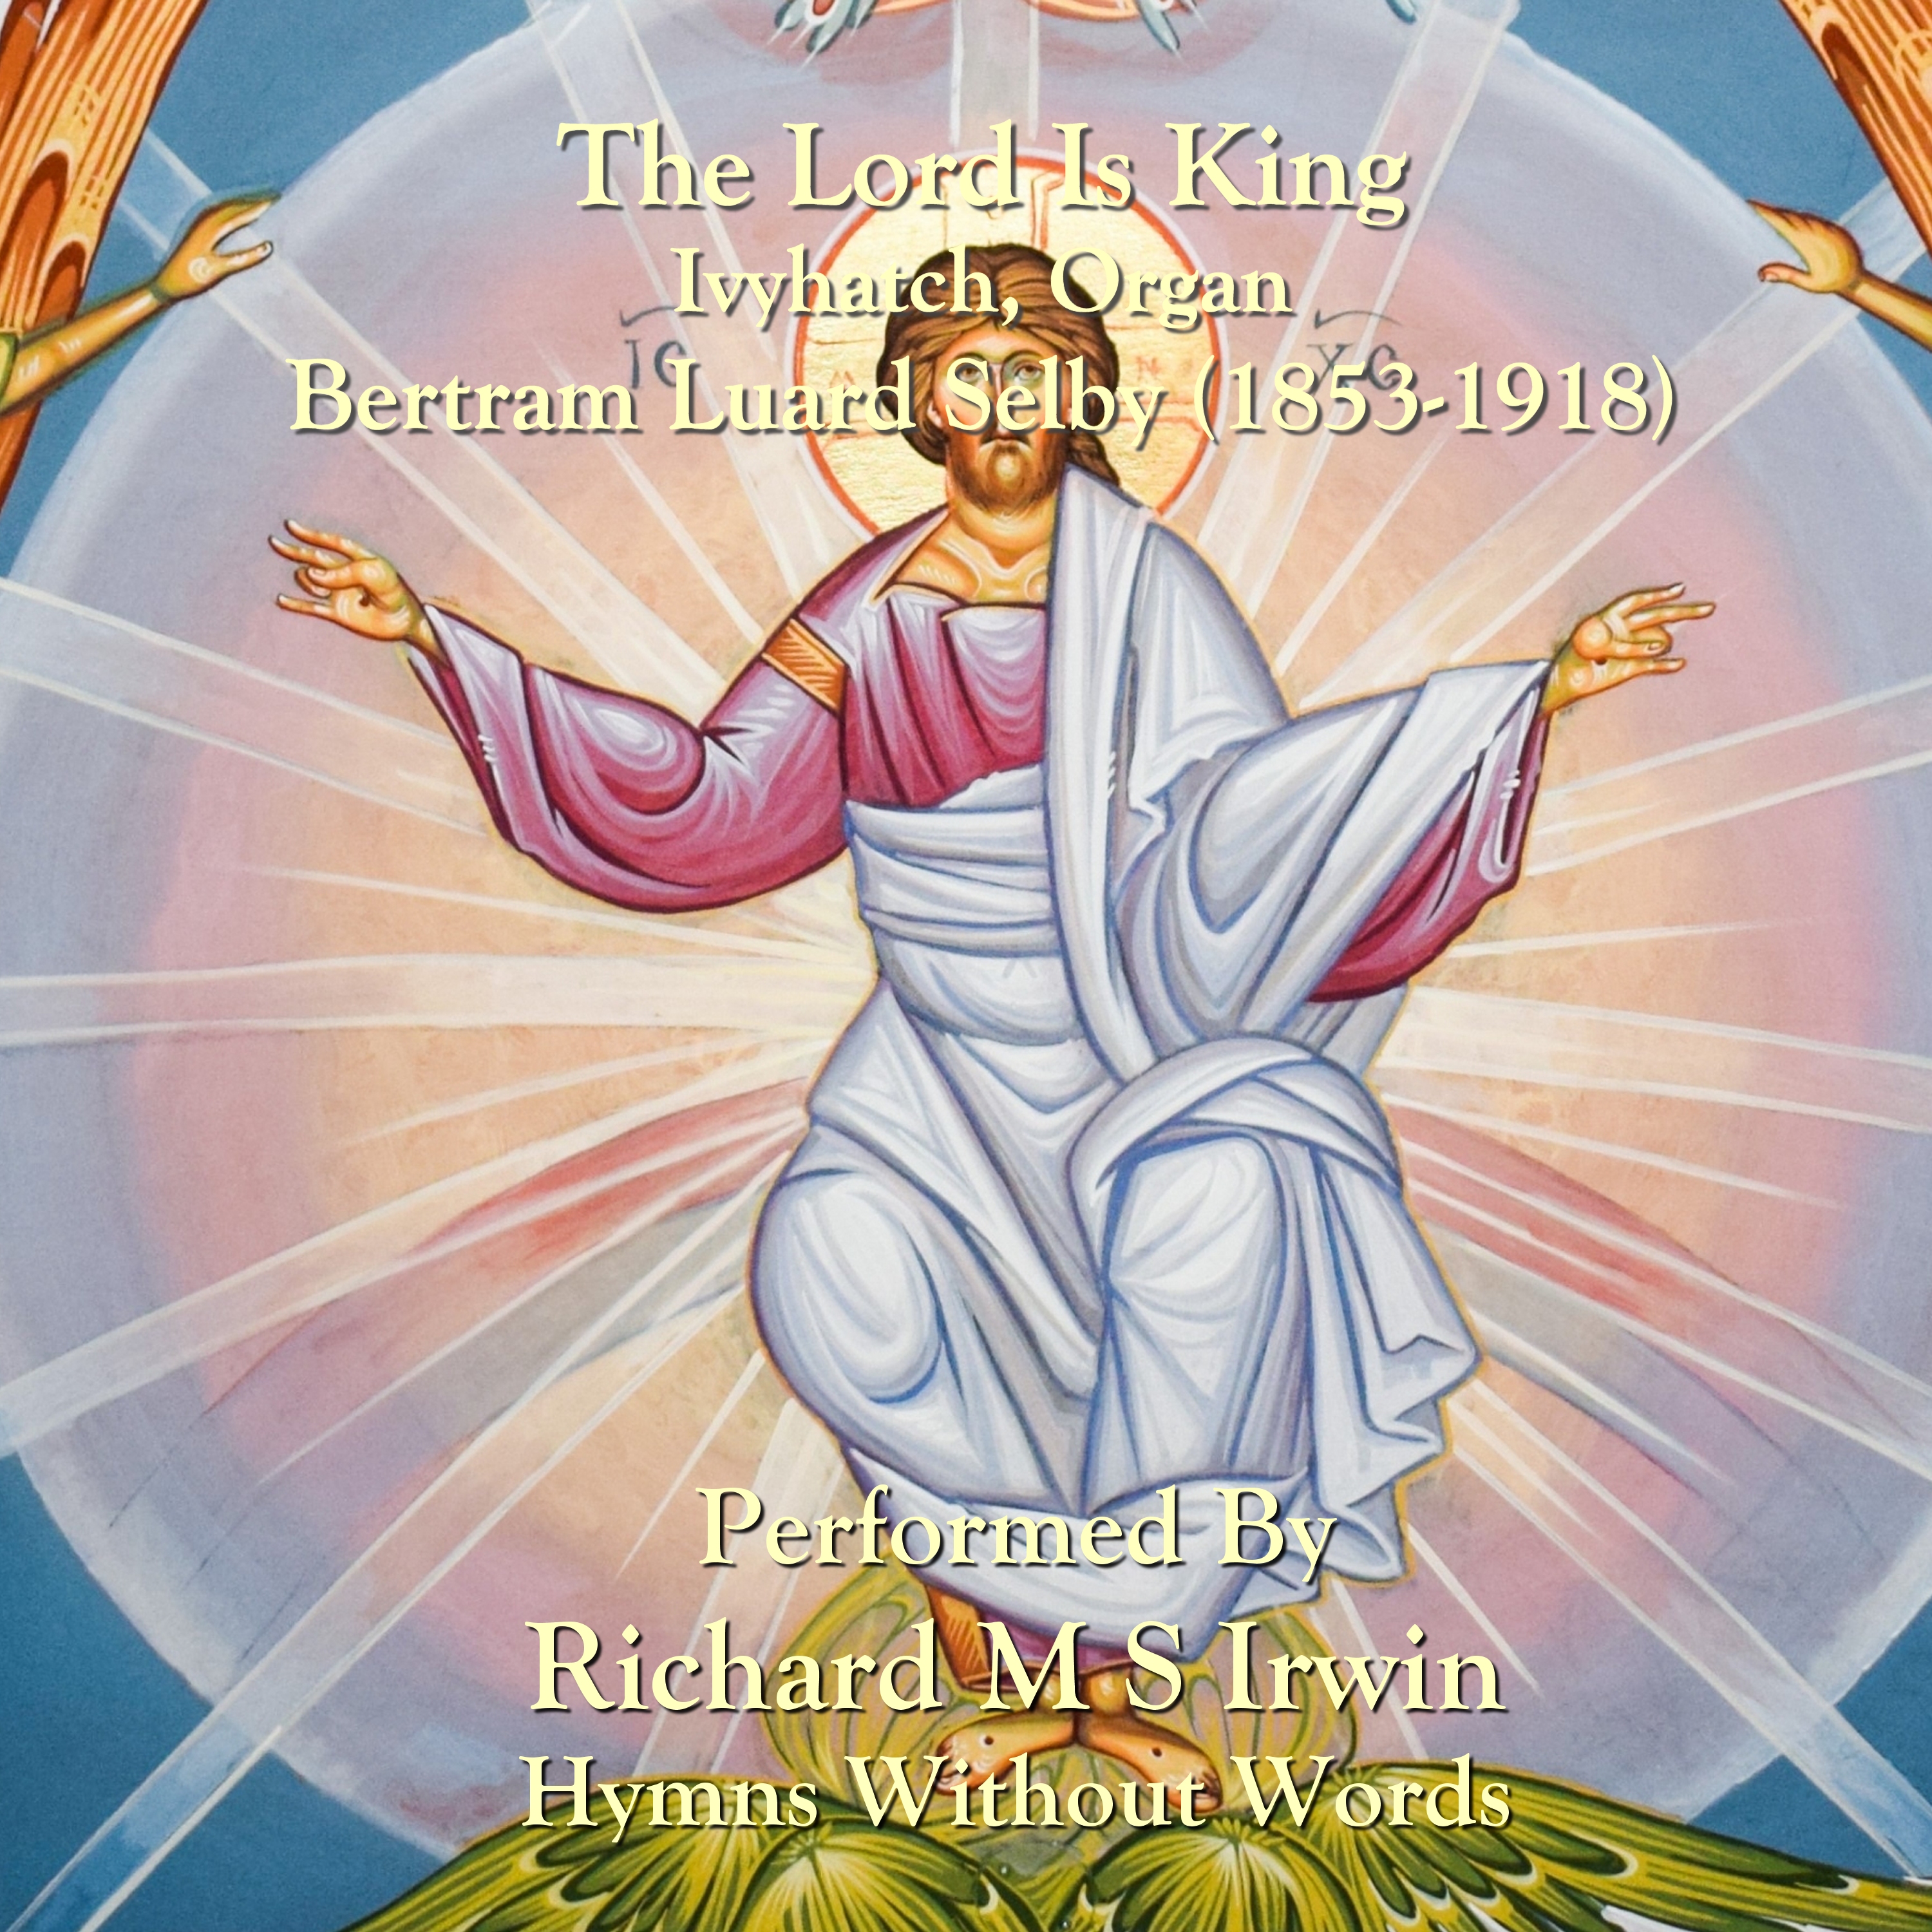 The Lord Is King (Ivyhatch, Organ, 4 Verses)